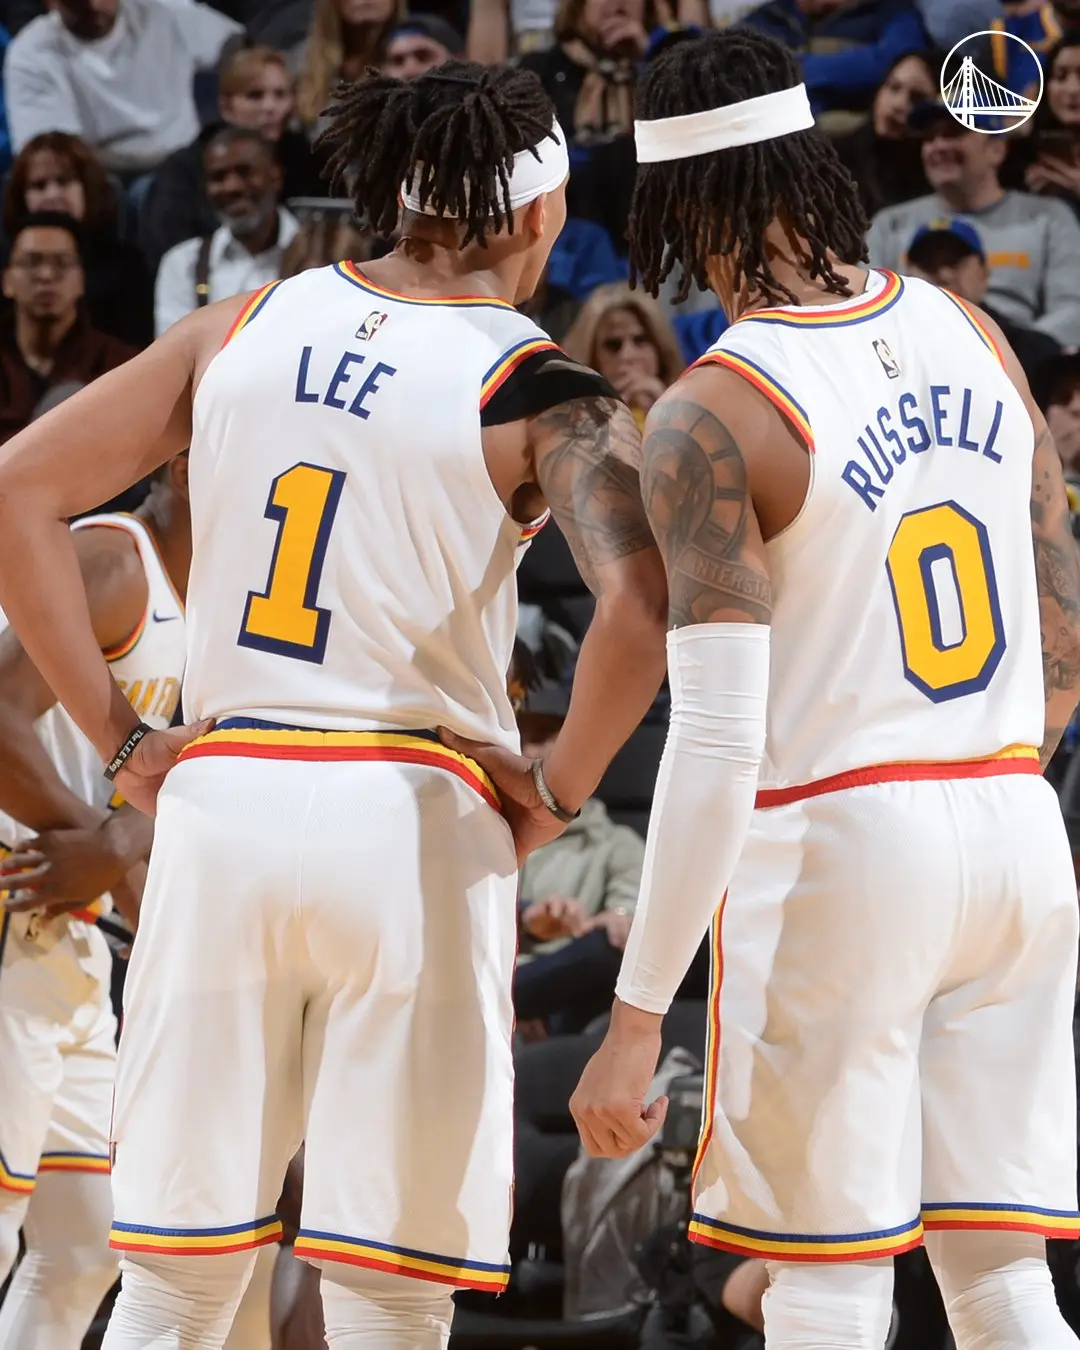 Damion Lee - D'Angelo Russell - Golden State Warriors - Denver Nuggets